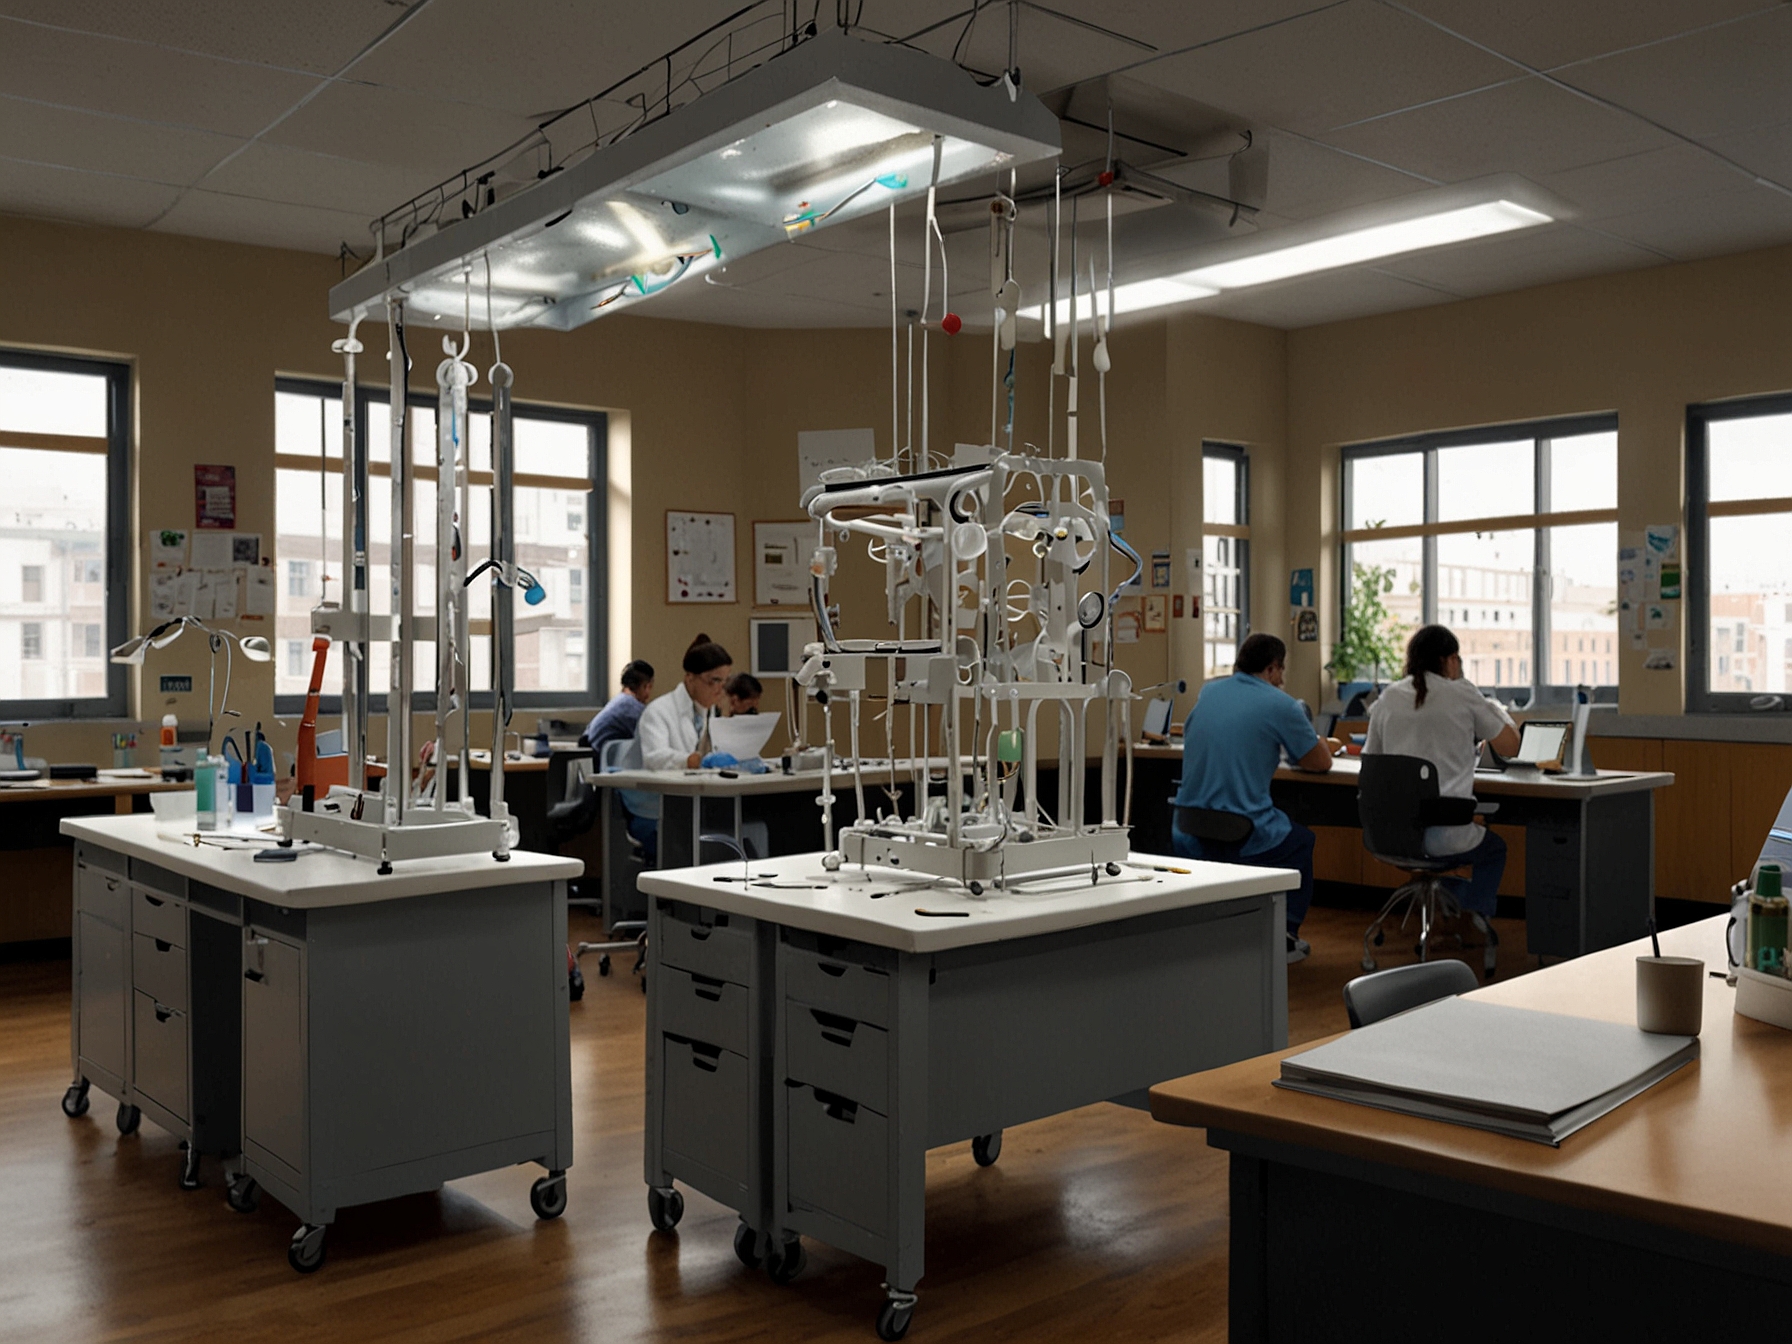 The DIY lab platform showcased in a classroom setting, where students engage in hands-on chemotaxis assays using C. elegans to understand molecular biology and inspire future scientific inquiry.